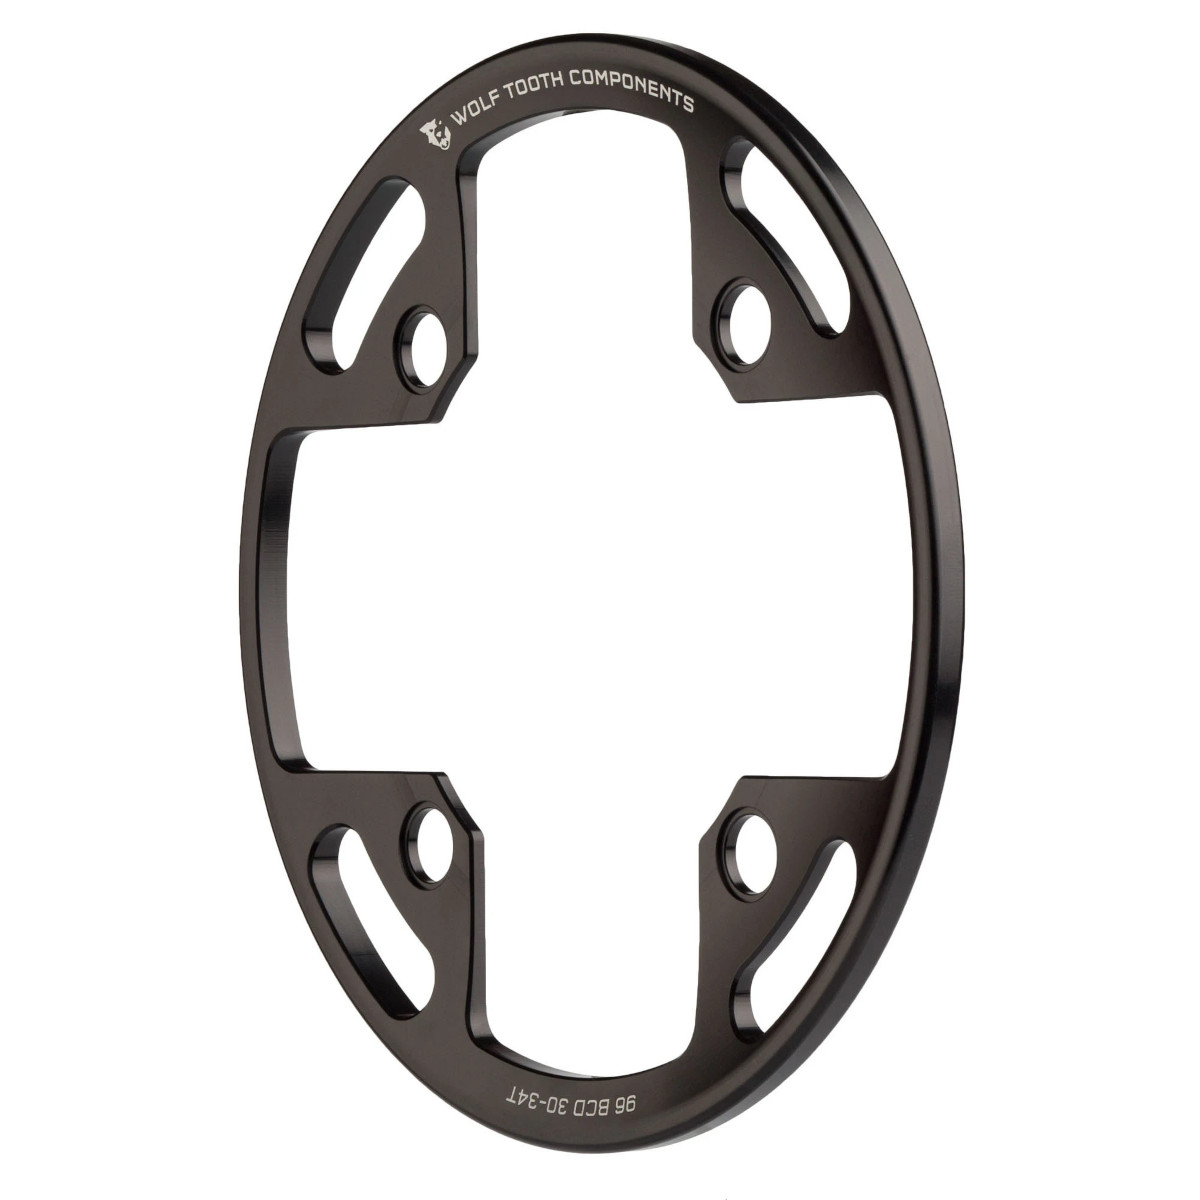 Productfoto van Wolf Tooth 96 BCD Bash Ring for Shimano Compact Triple